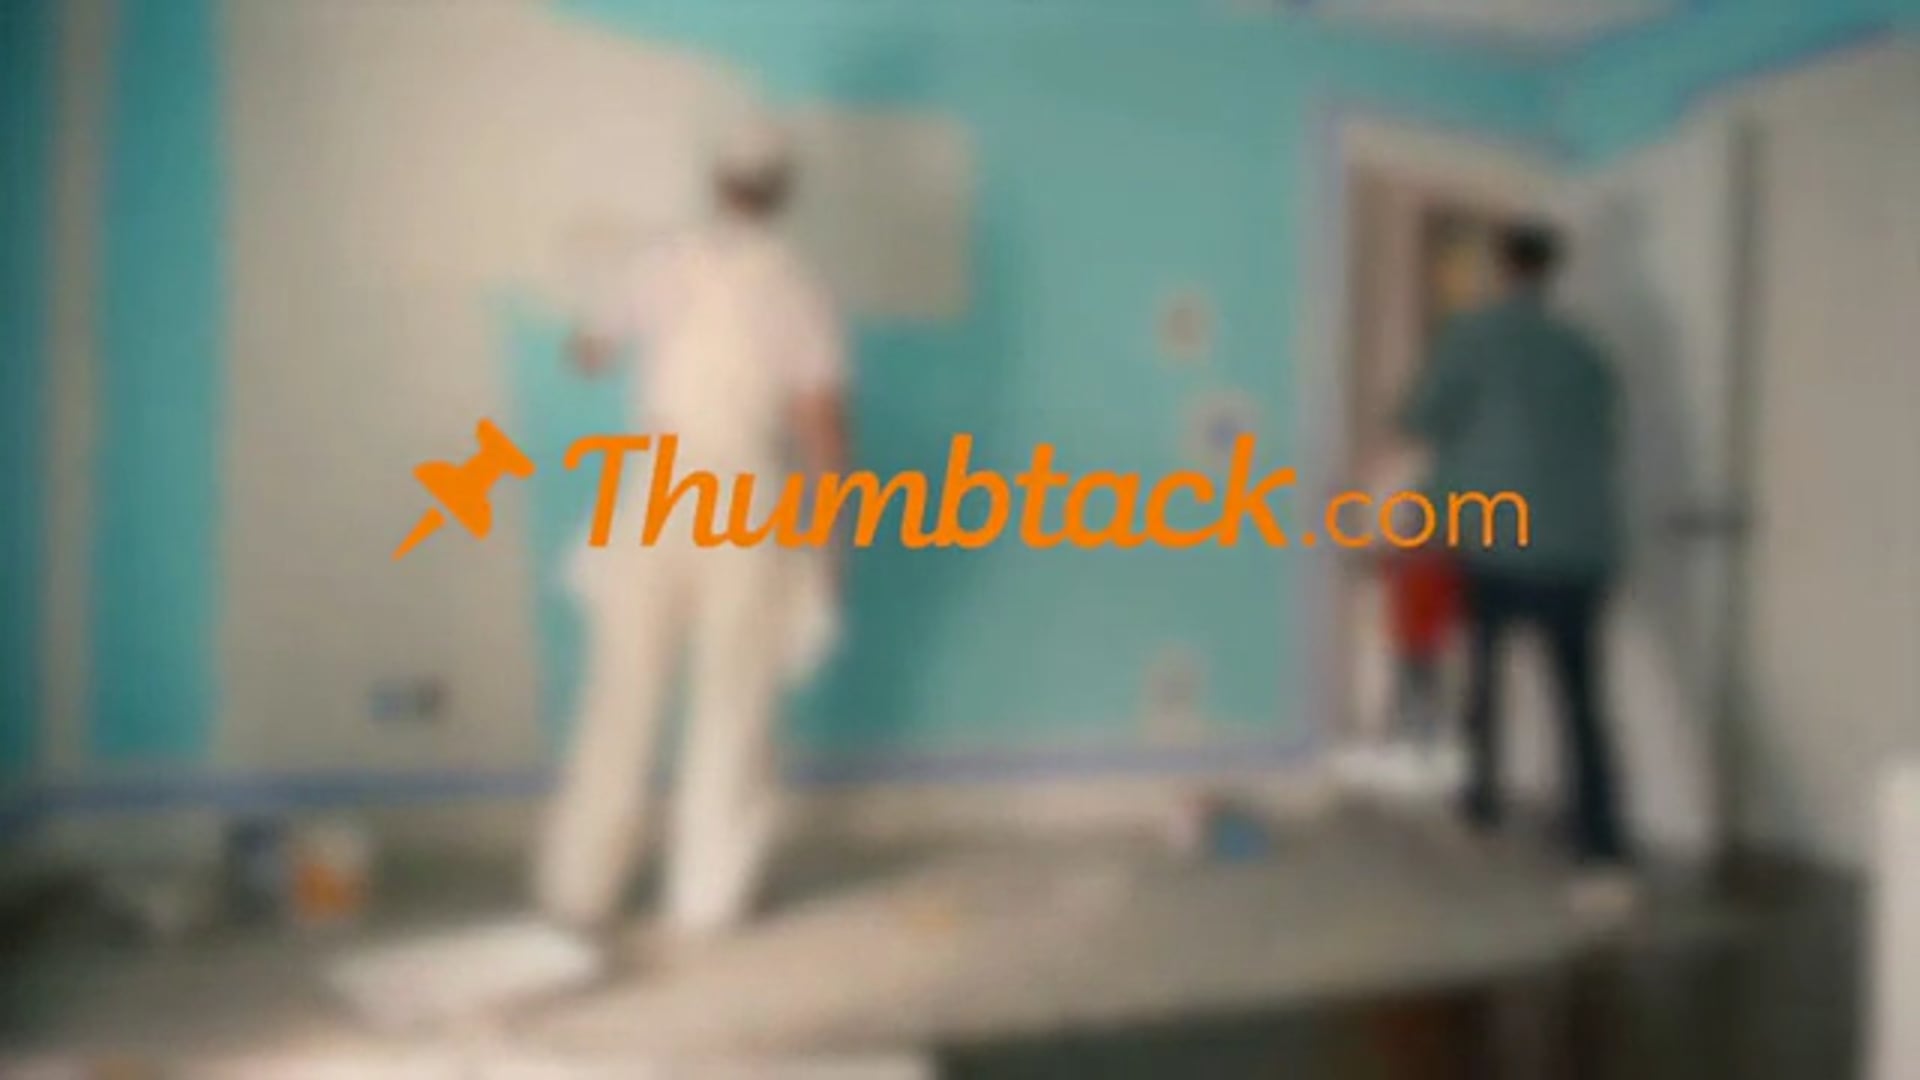 Thumbtack TV Commercial, 'Your To-Do List'